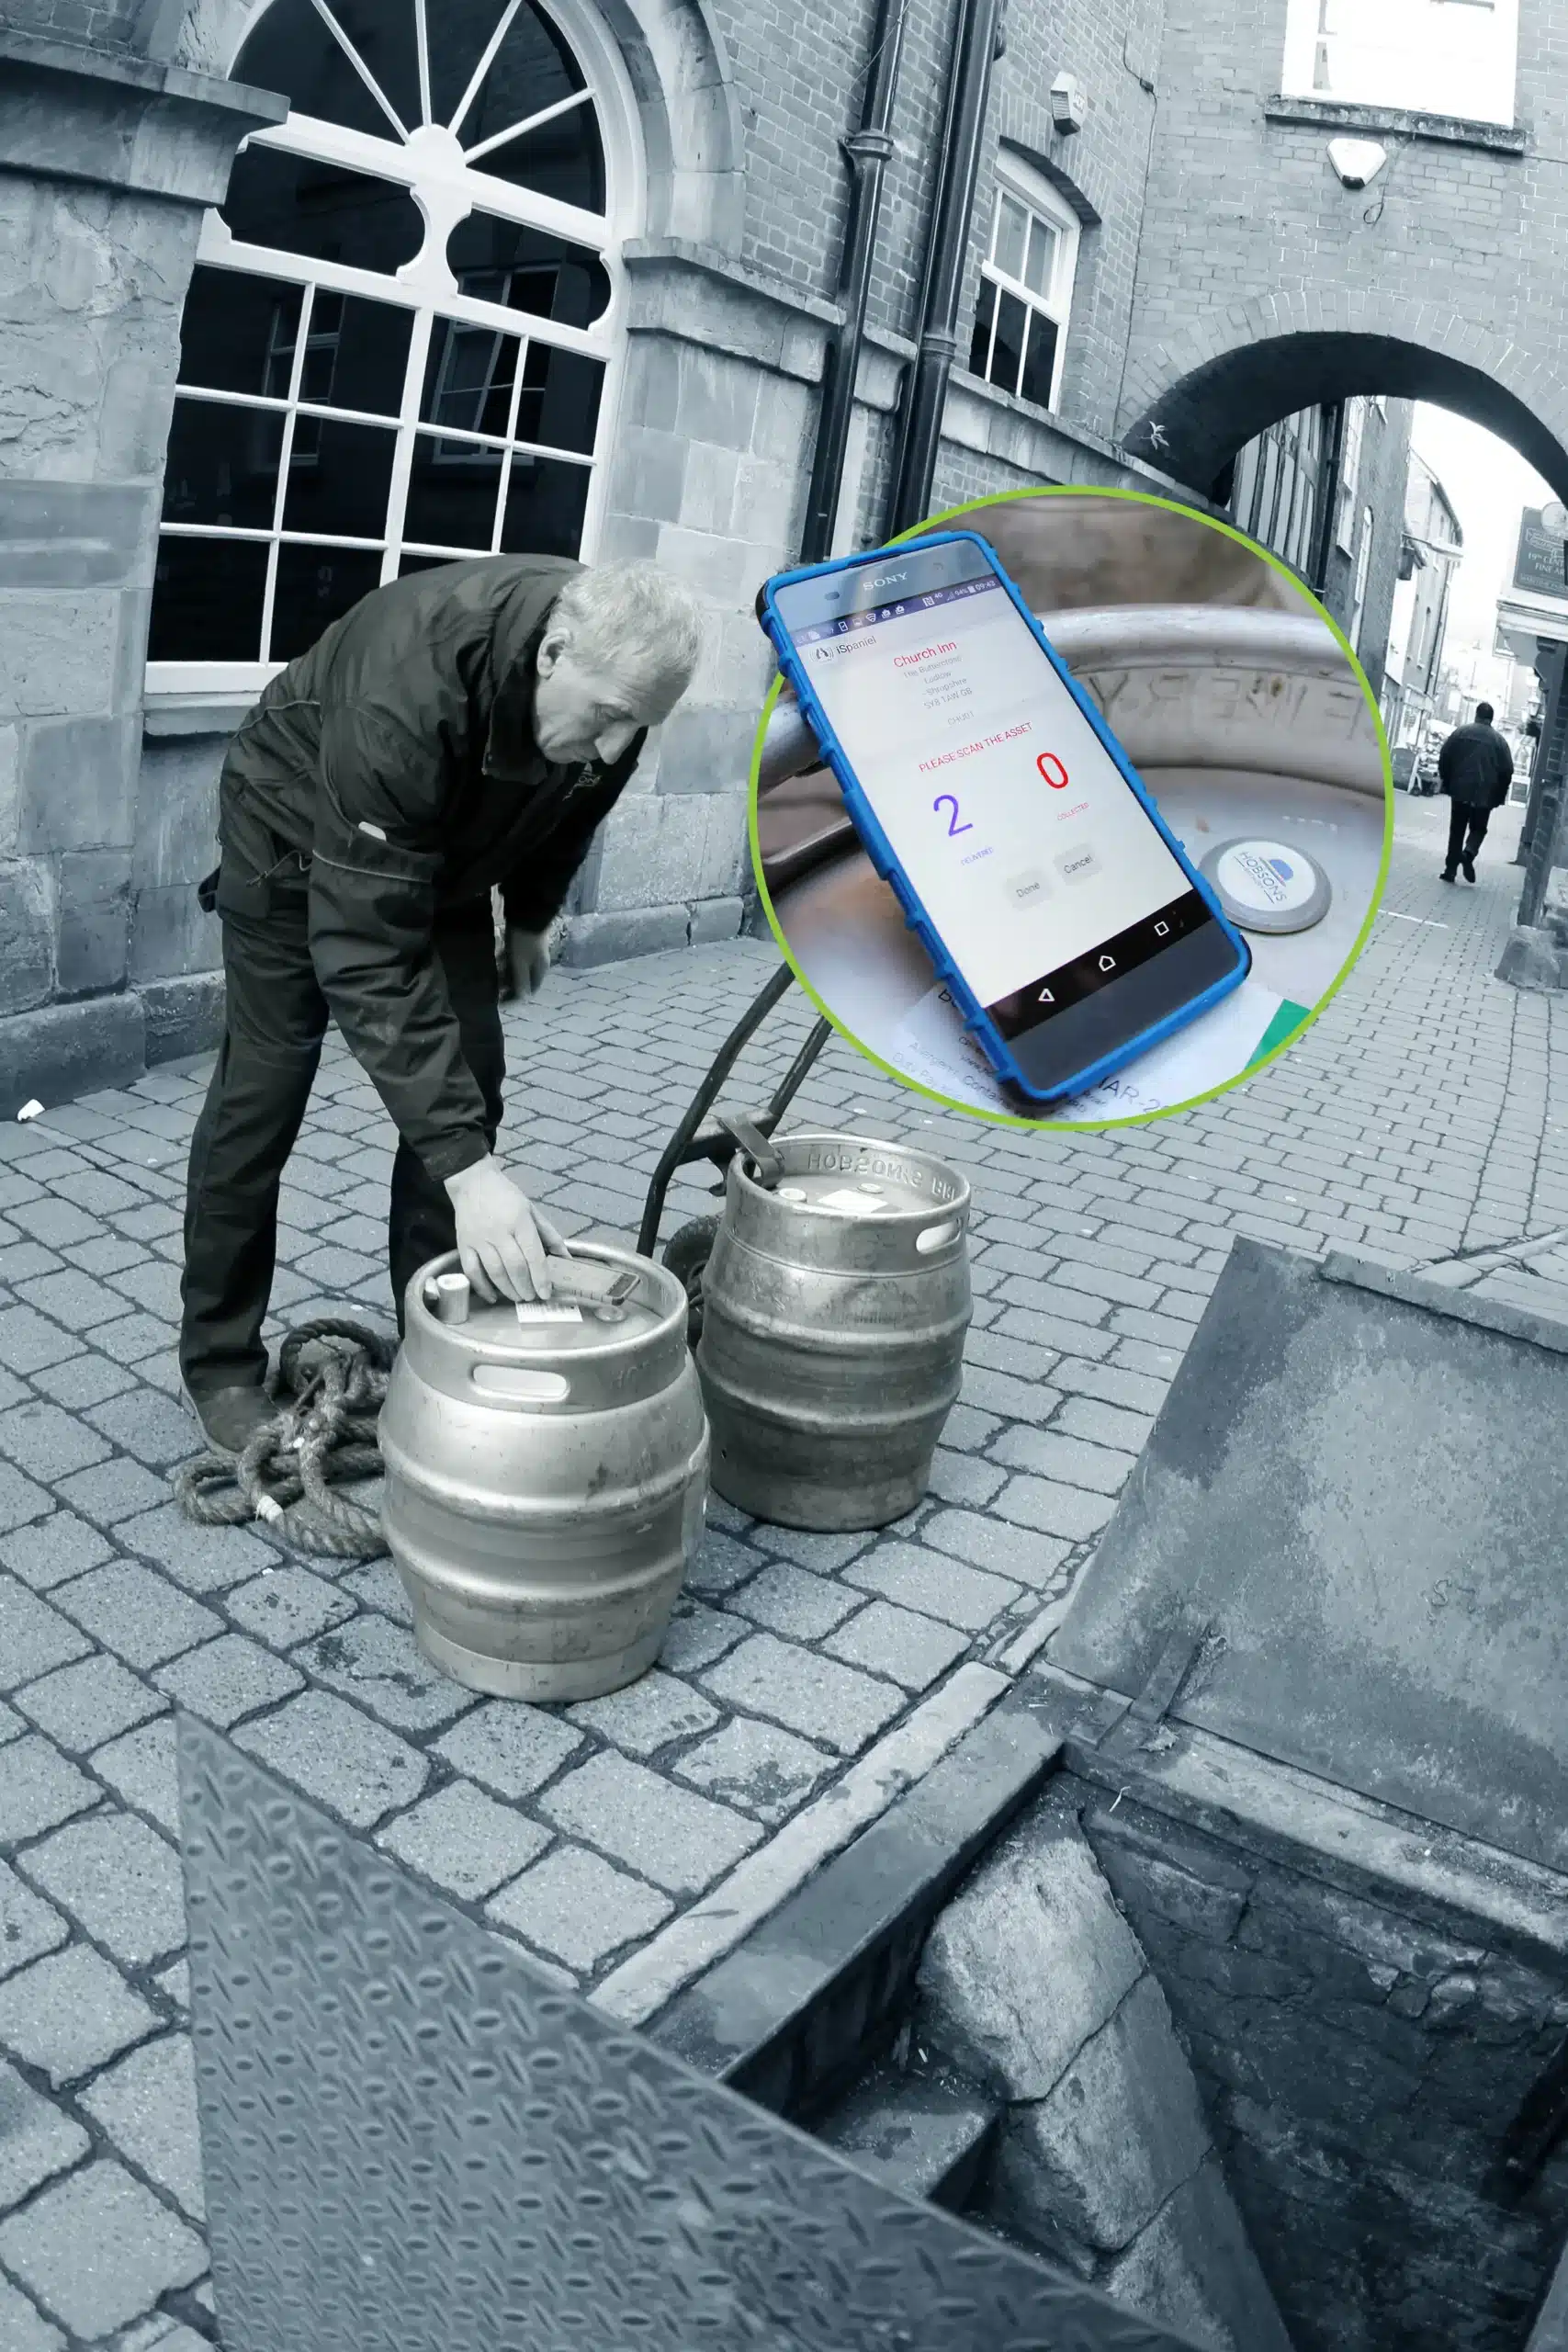 A man scans a label on a beer keg using a smartphone, with a cutout showing an app on the smartphone screen